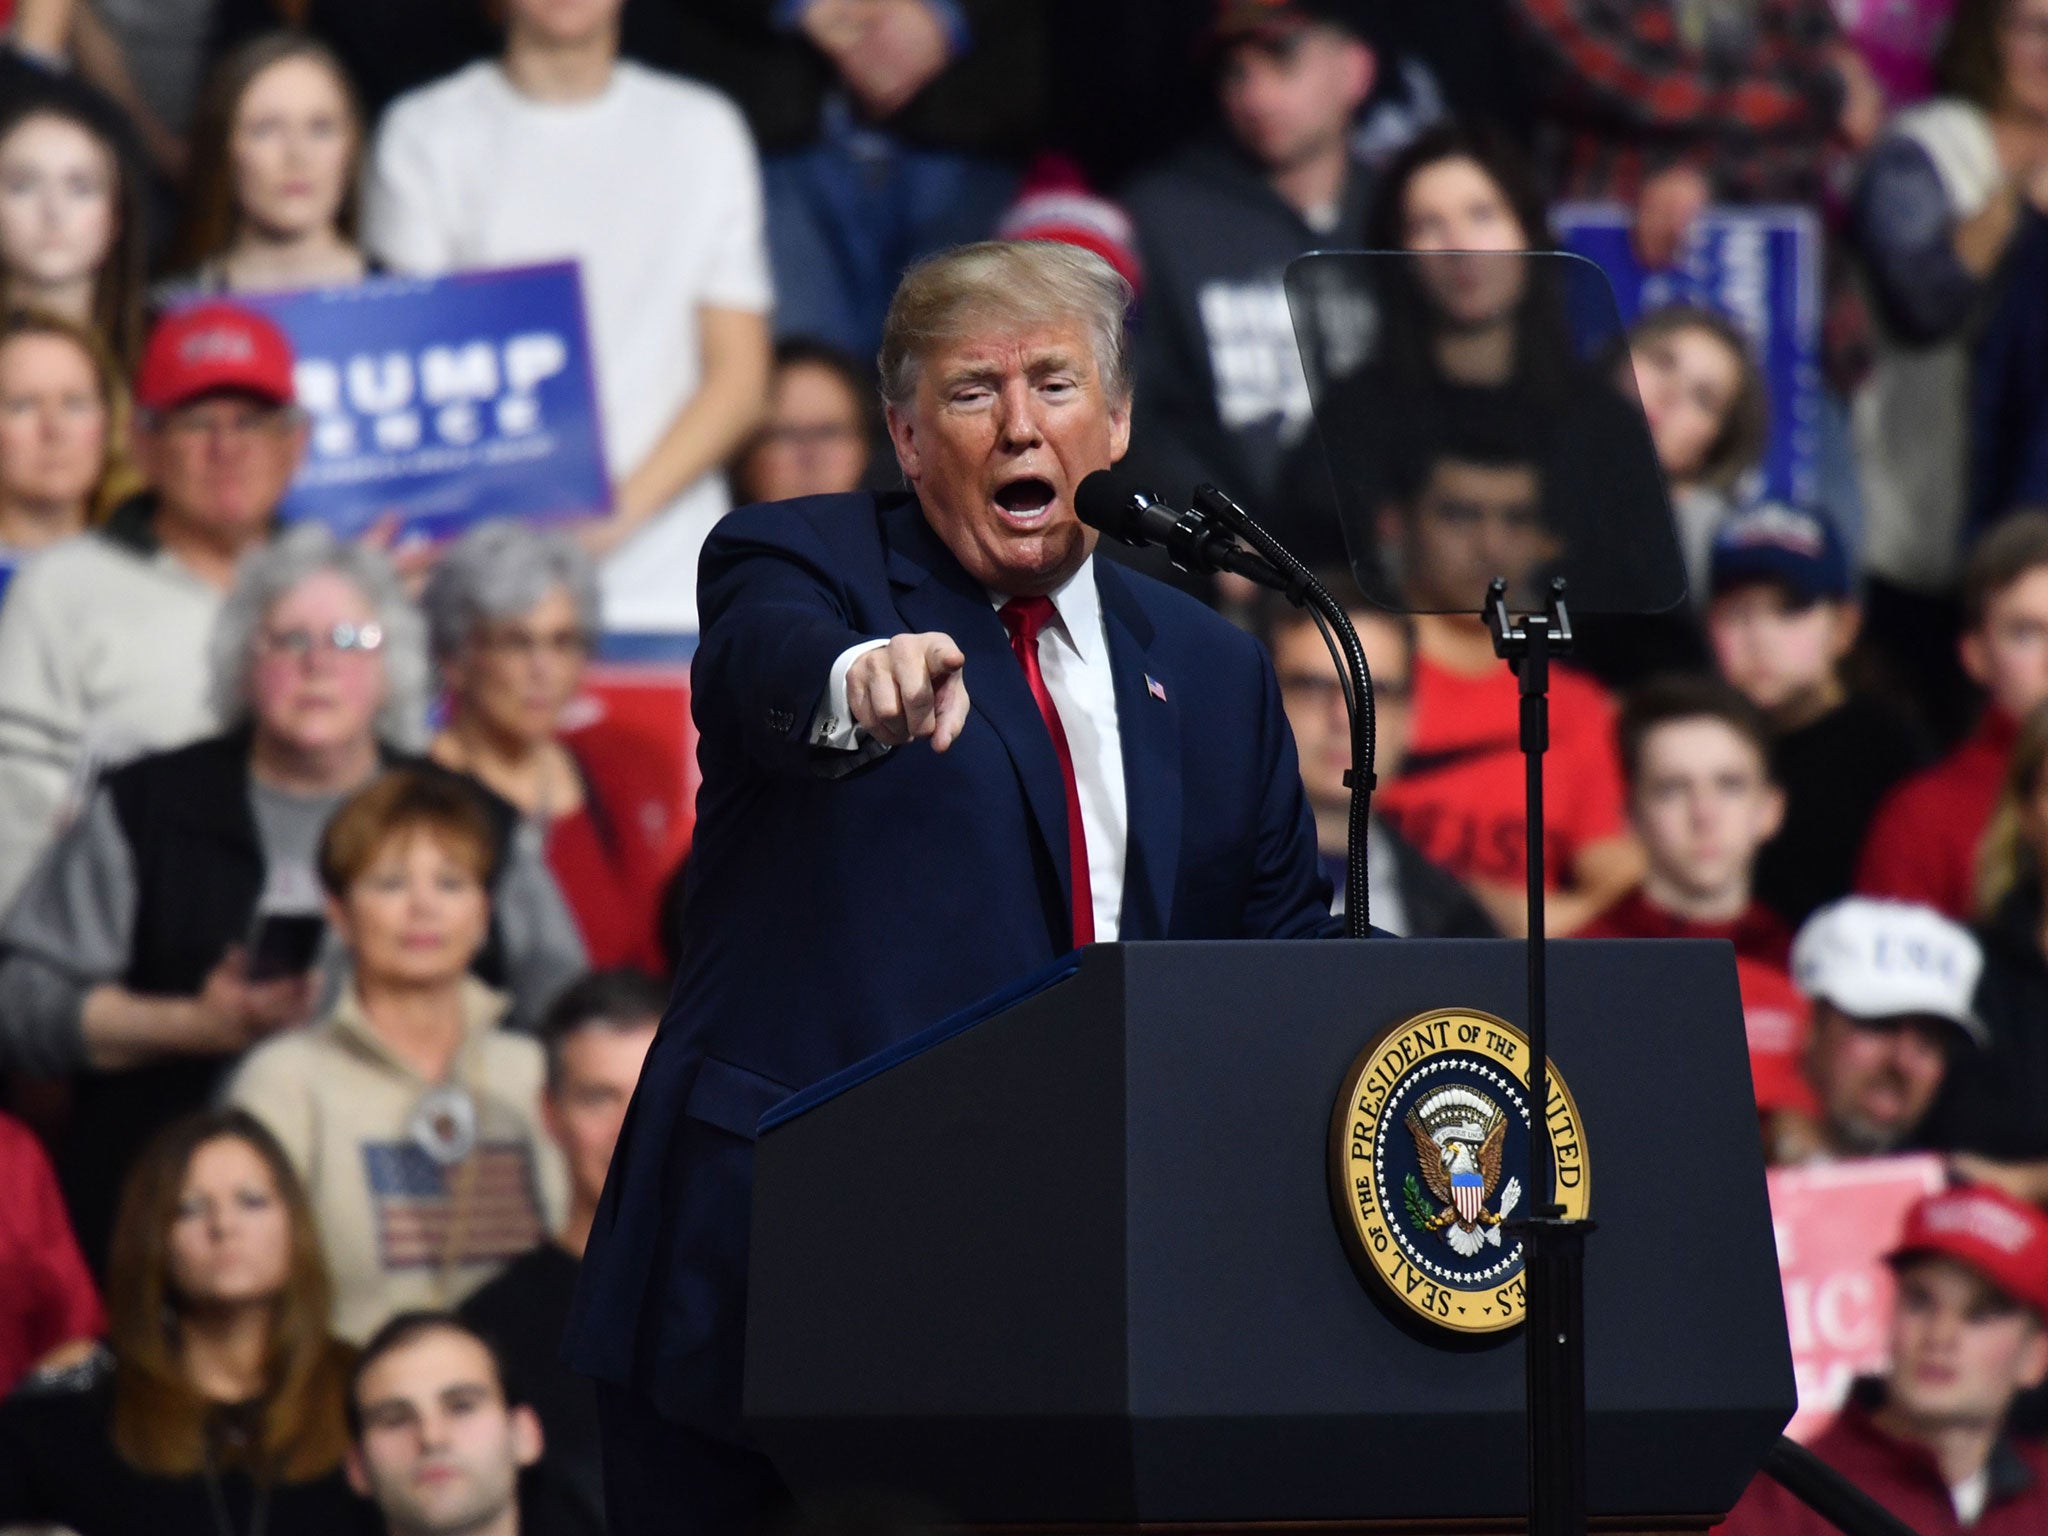 US President Donald Trump delivers remarks at the Make America Great Again Rally on March 10, 2018 in Moon Township, Pennsylvania.